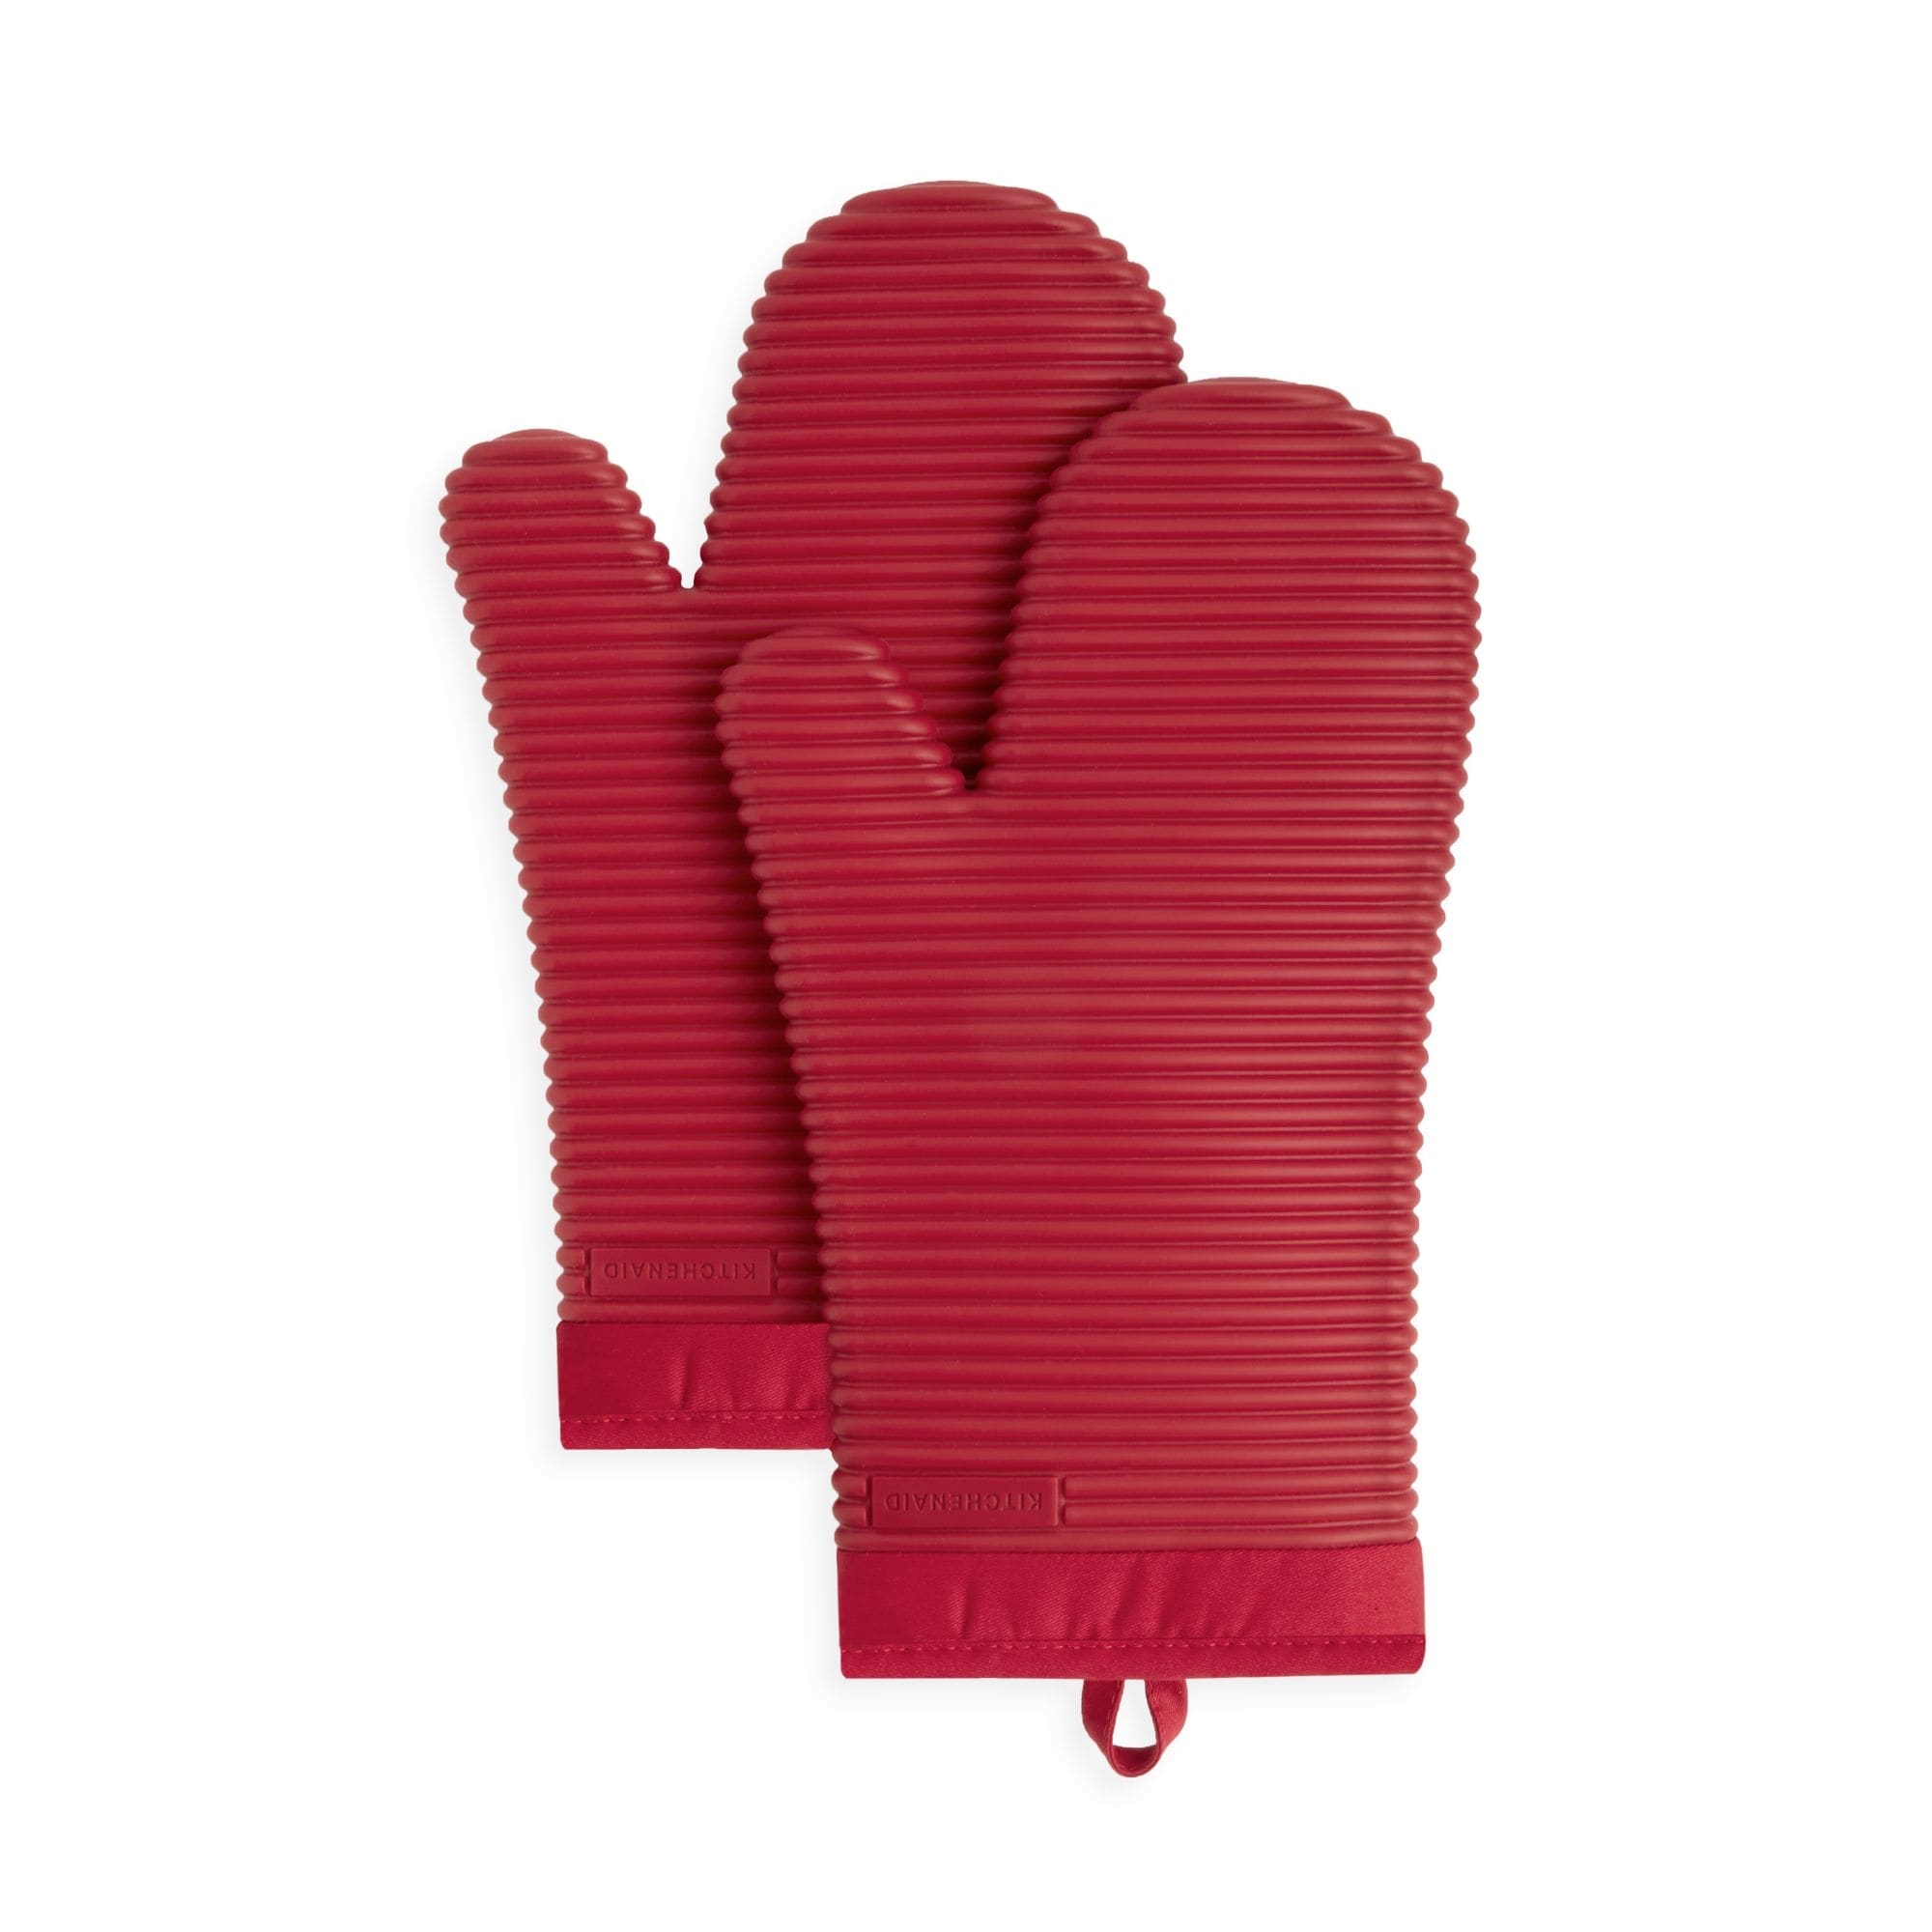 https://ak1.ostkcdn.com/images/products/is/images/direct/783775f5e144d4fde66a39c9dcfe3aa5db6f30f9/KitchenAid-Ribbed-Soft-Silicone-Oven-Mitt-Set%2C-Set-of-2.jpg